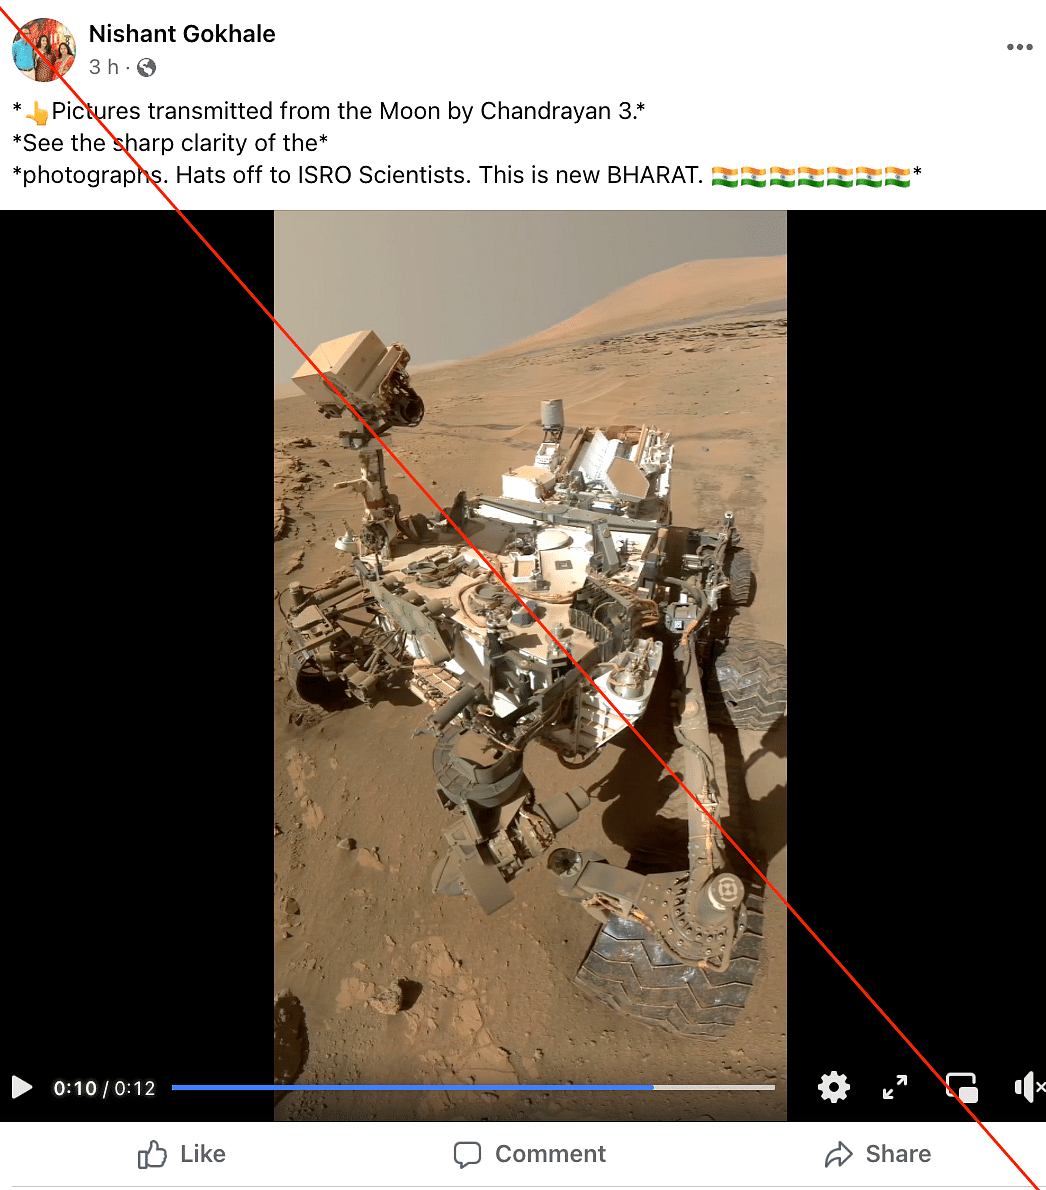 NASA confirmed to The Quint that the video shows visuals of Mars captured by Mars Opportunity Rover in 2017.